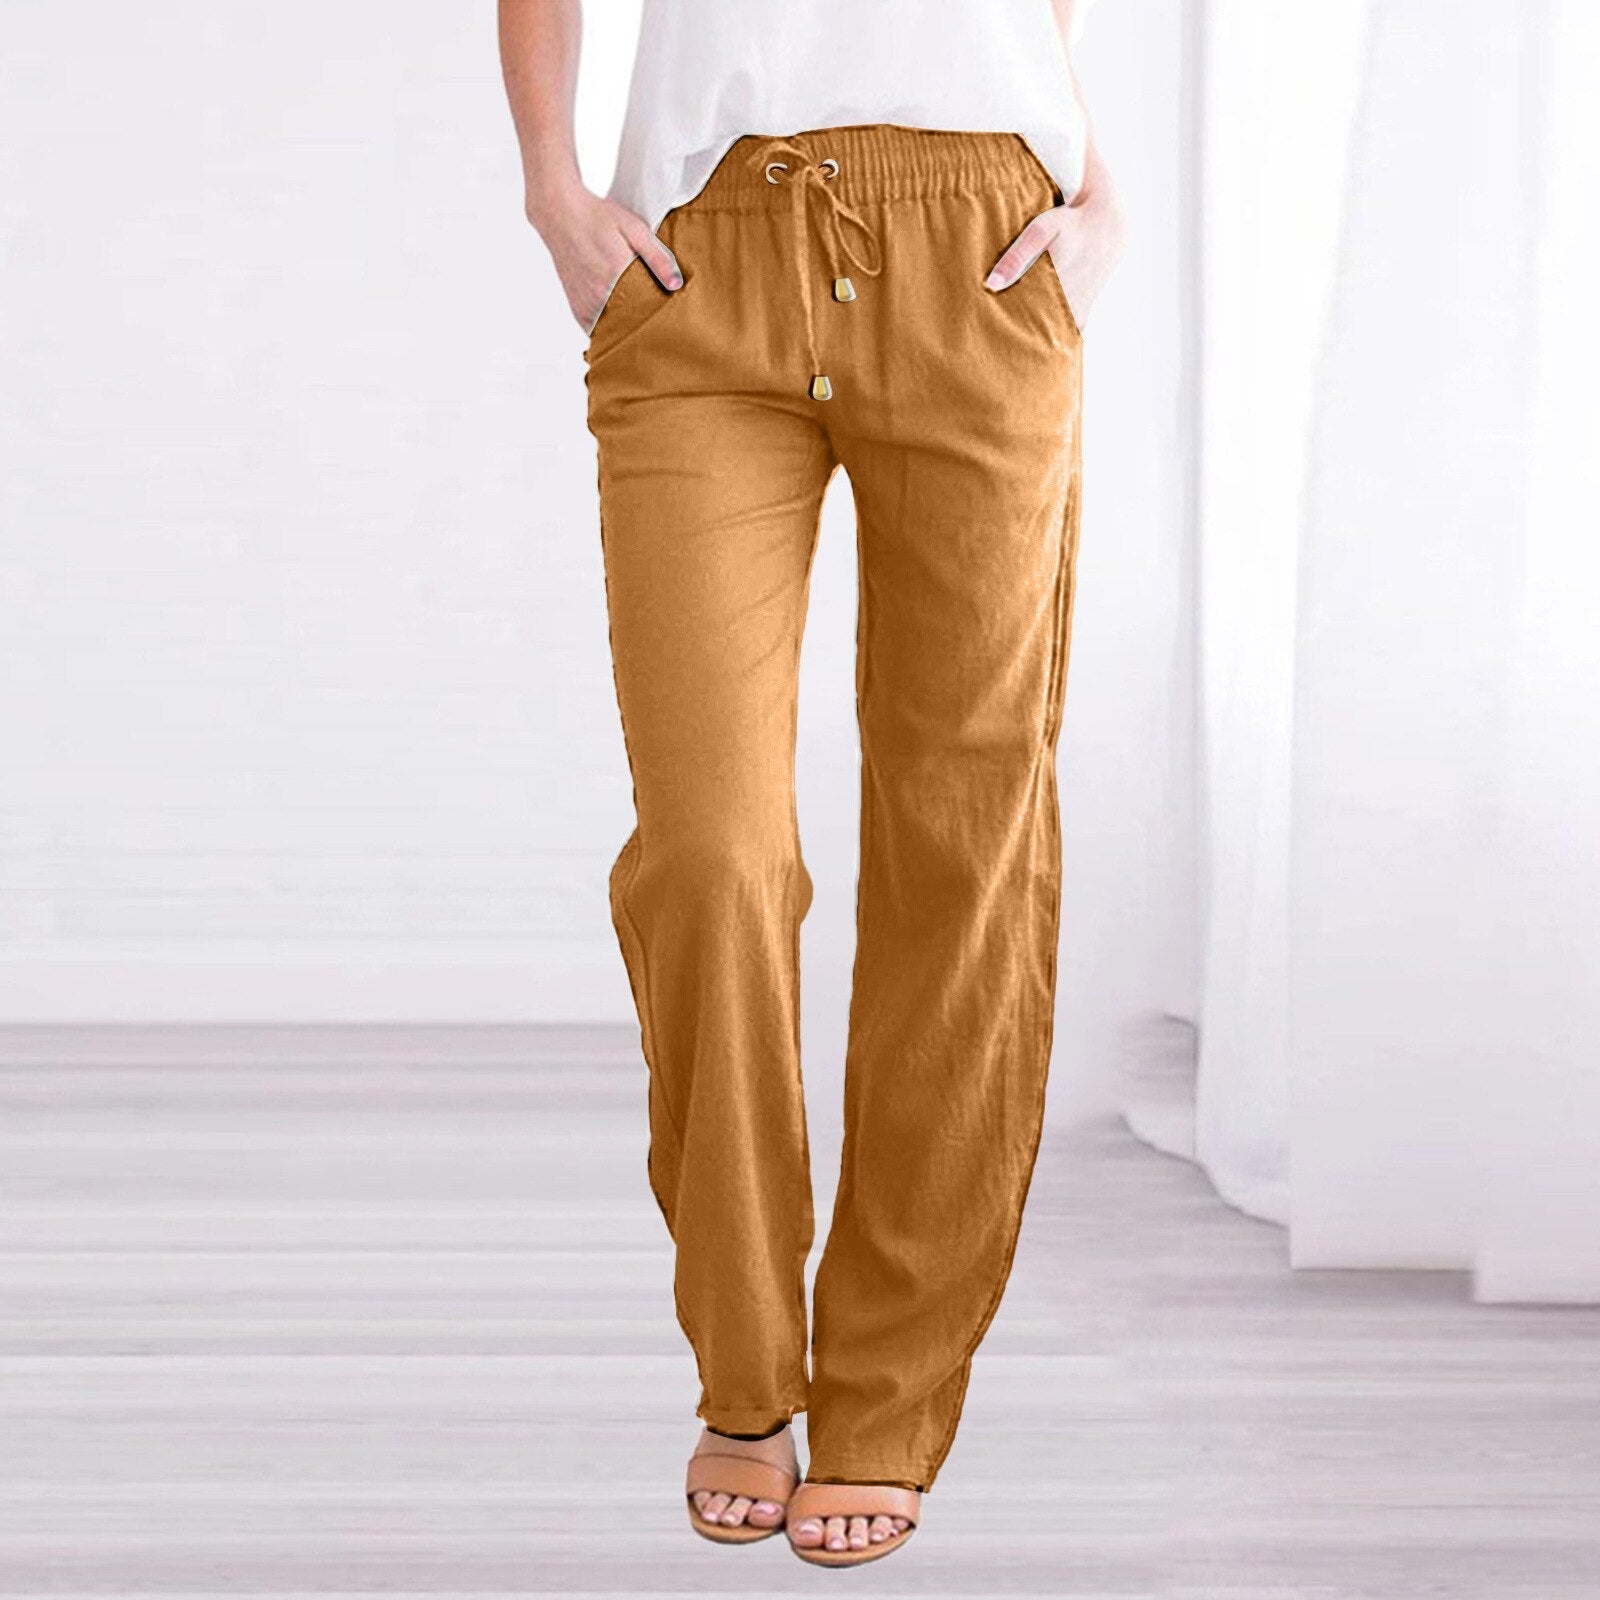 nsendm Female Pants Adult Running Pants in Bulk Womens Cotton Casual Loose  Pants Comfy Work Pants with Pockets Women Elastic Waist Pants(Beige, S)